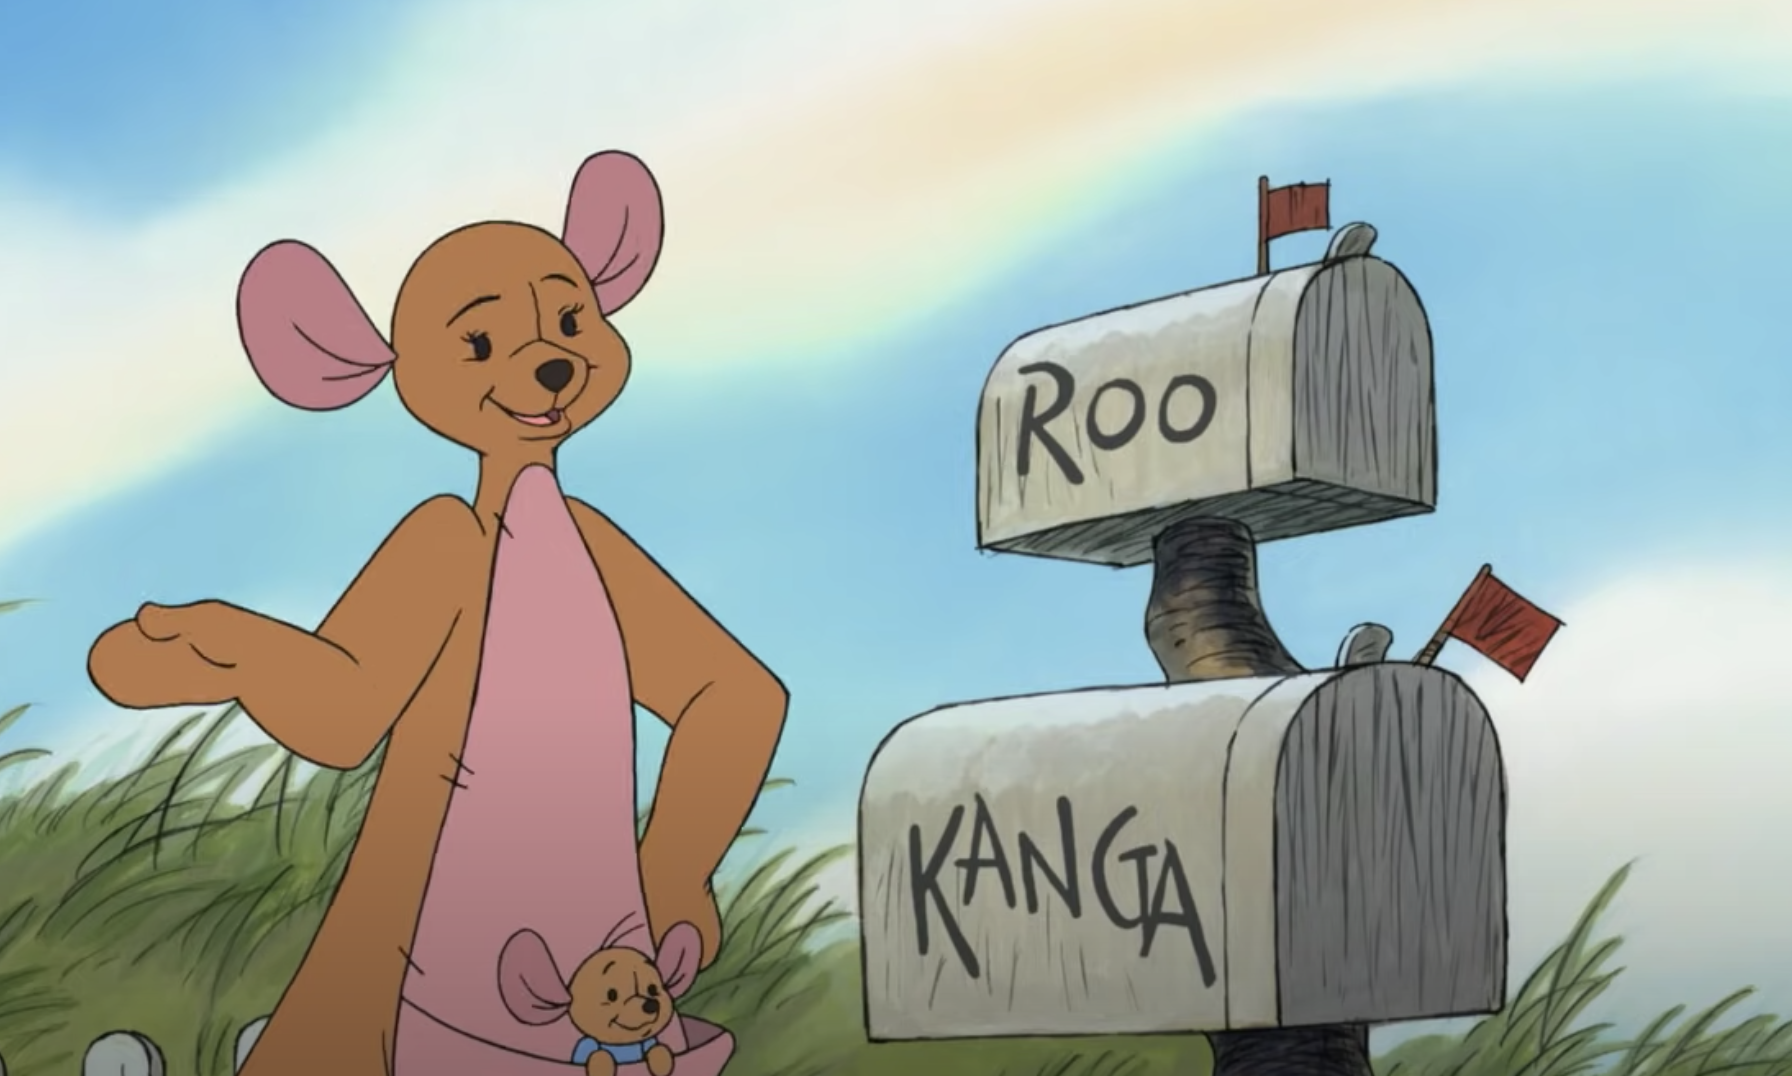 Kanga and Roo standing by their mailbox with their names on it